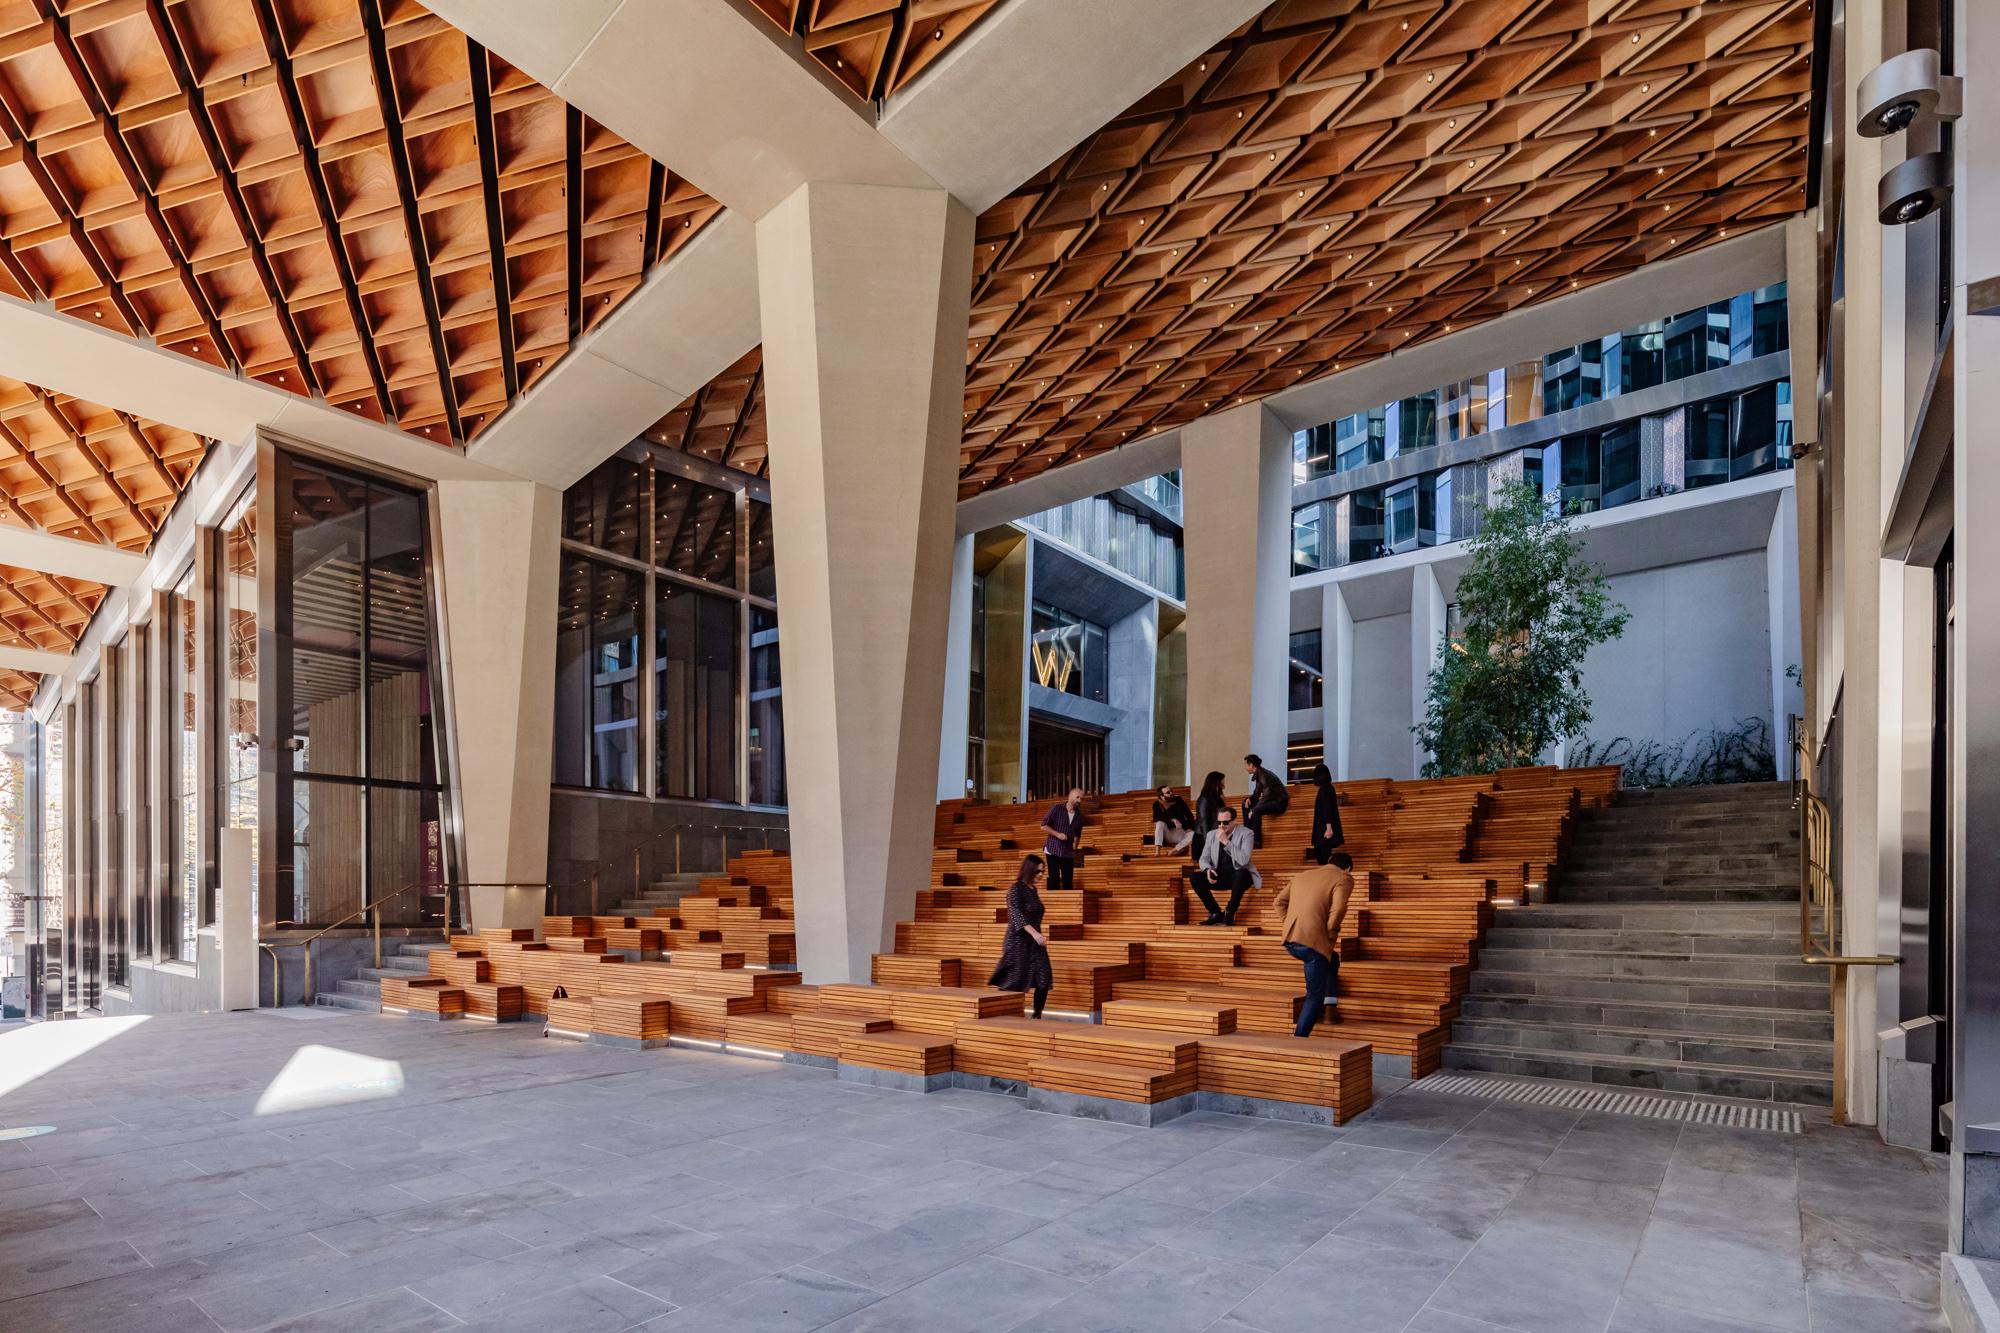 Eight people sitting or walking around wooden podium-style benches in an undercover atrium with concrete pillars and honeycomb ceiling